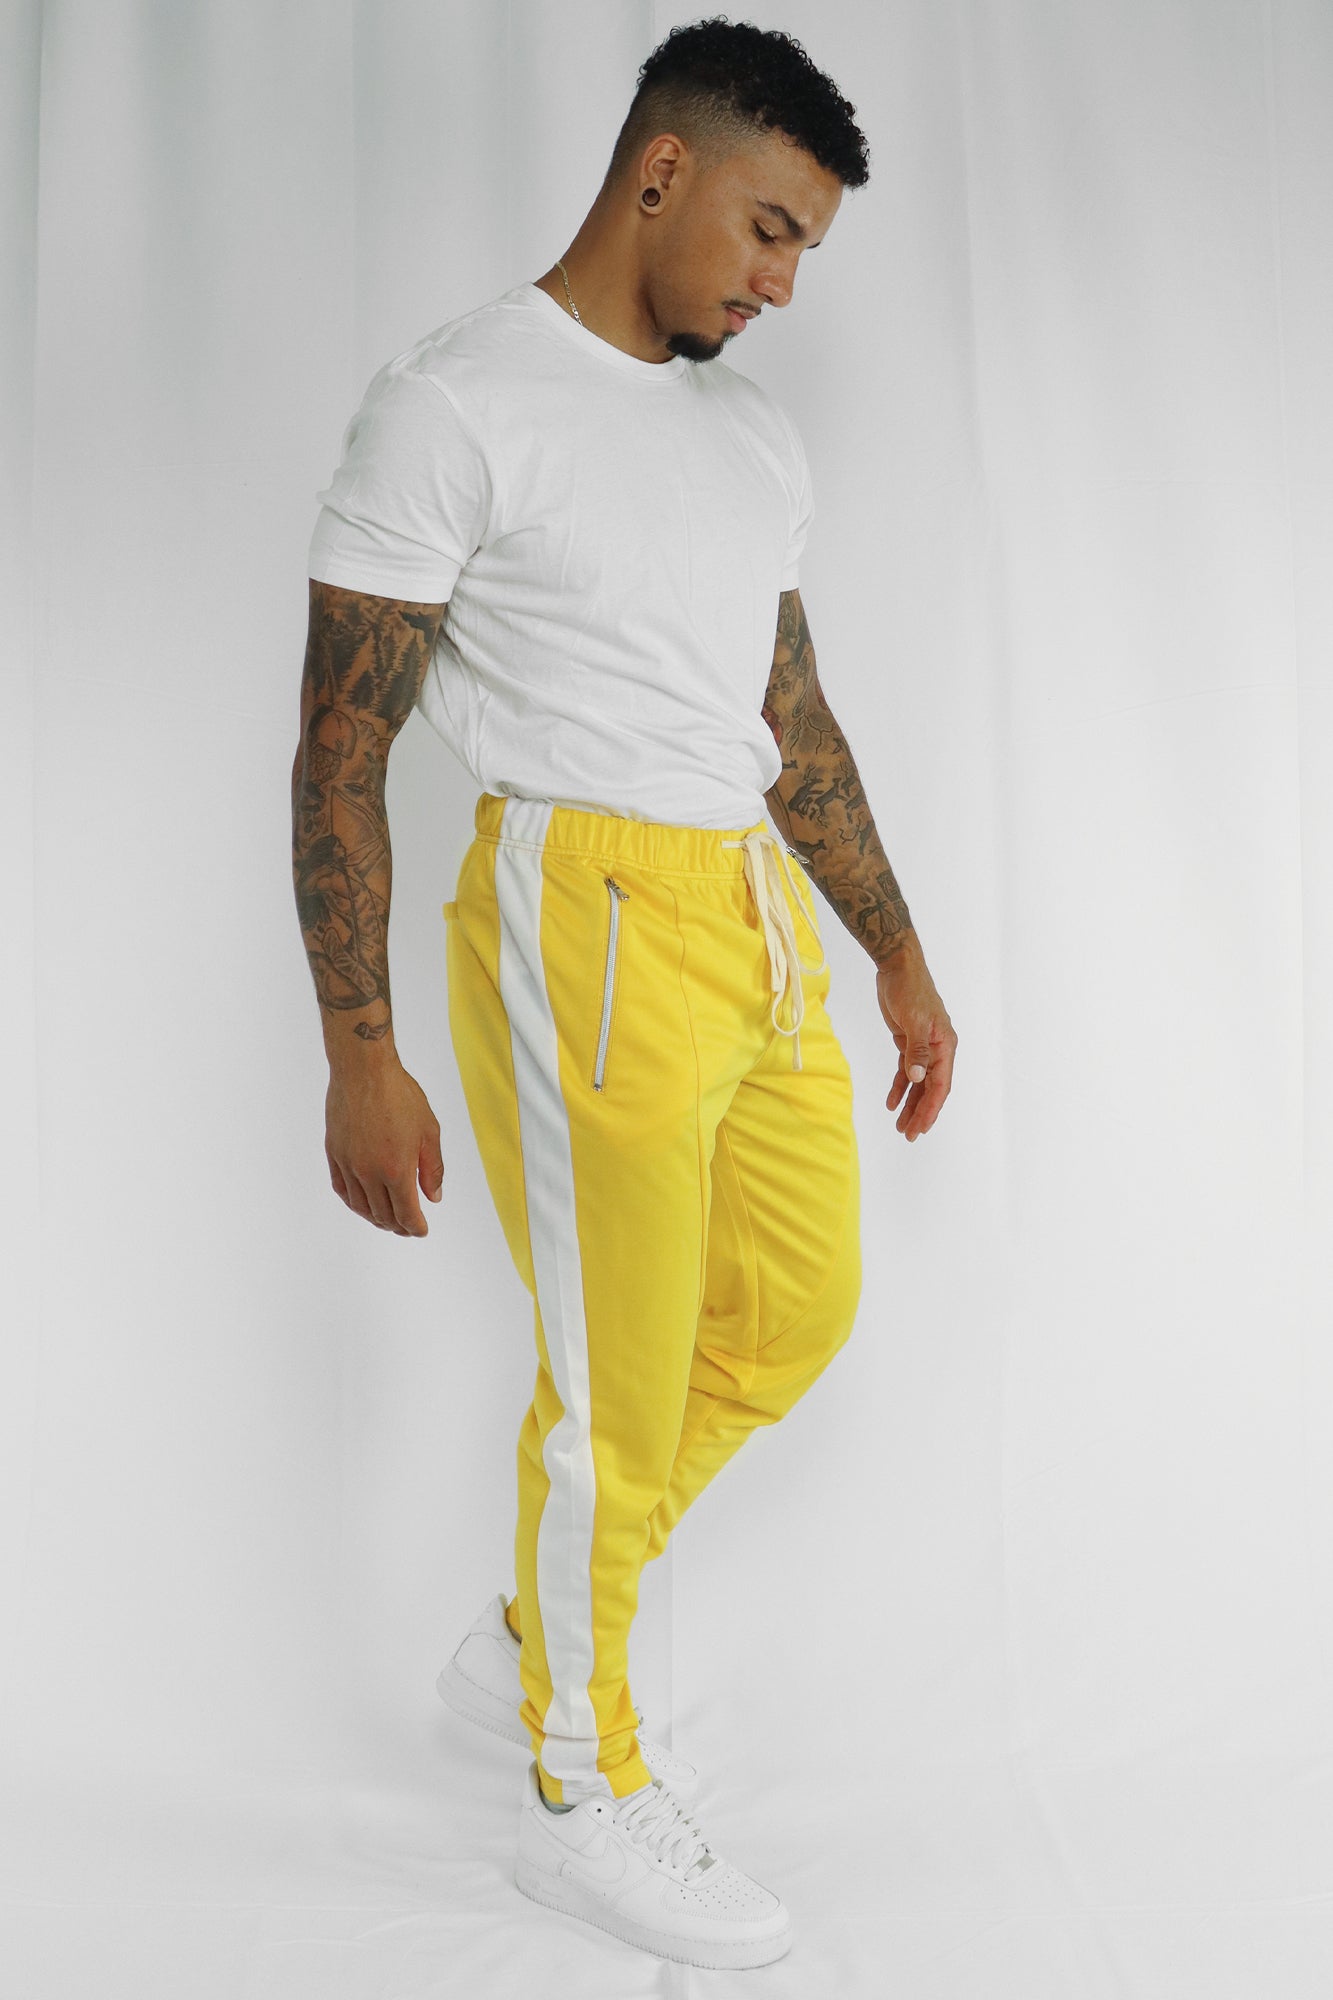 BLACK TRACK PANTS WITH YELLOW SIDE STRIP - Kaapstad Supply